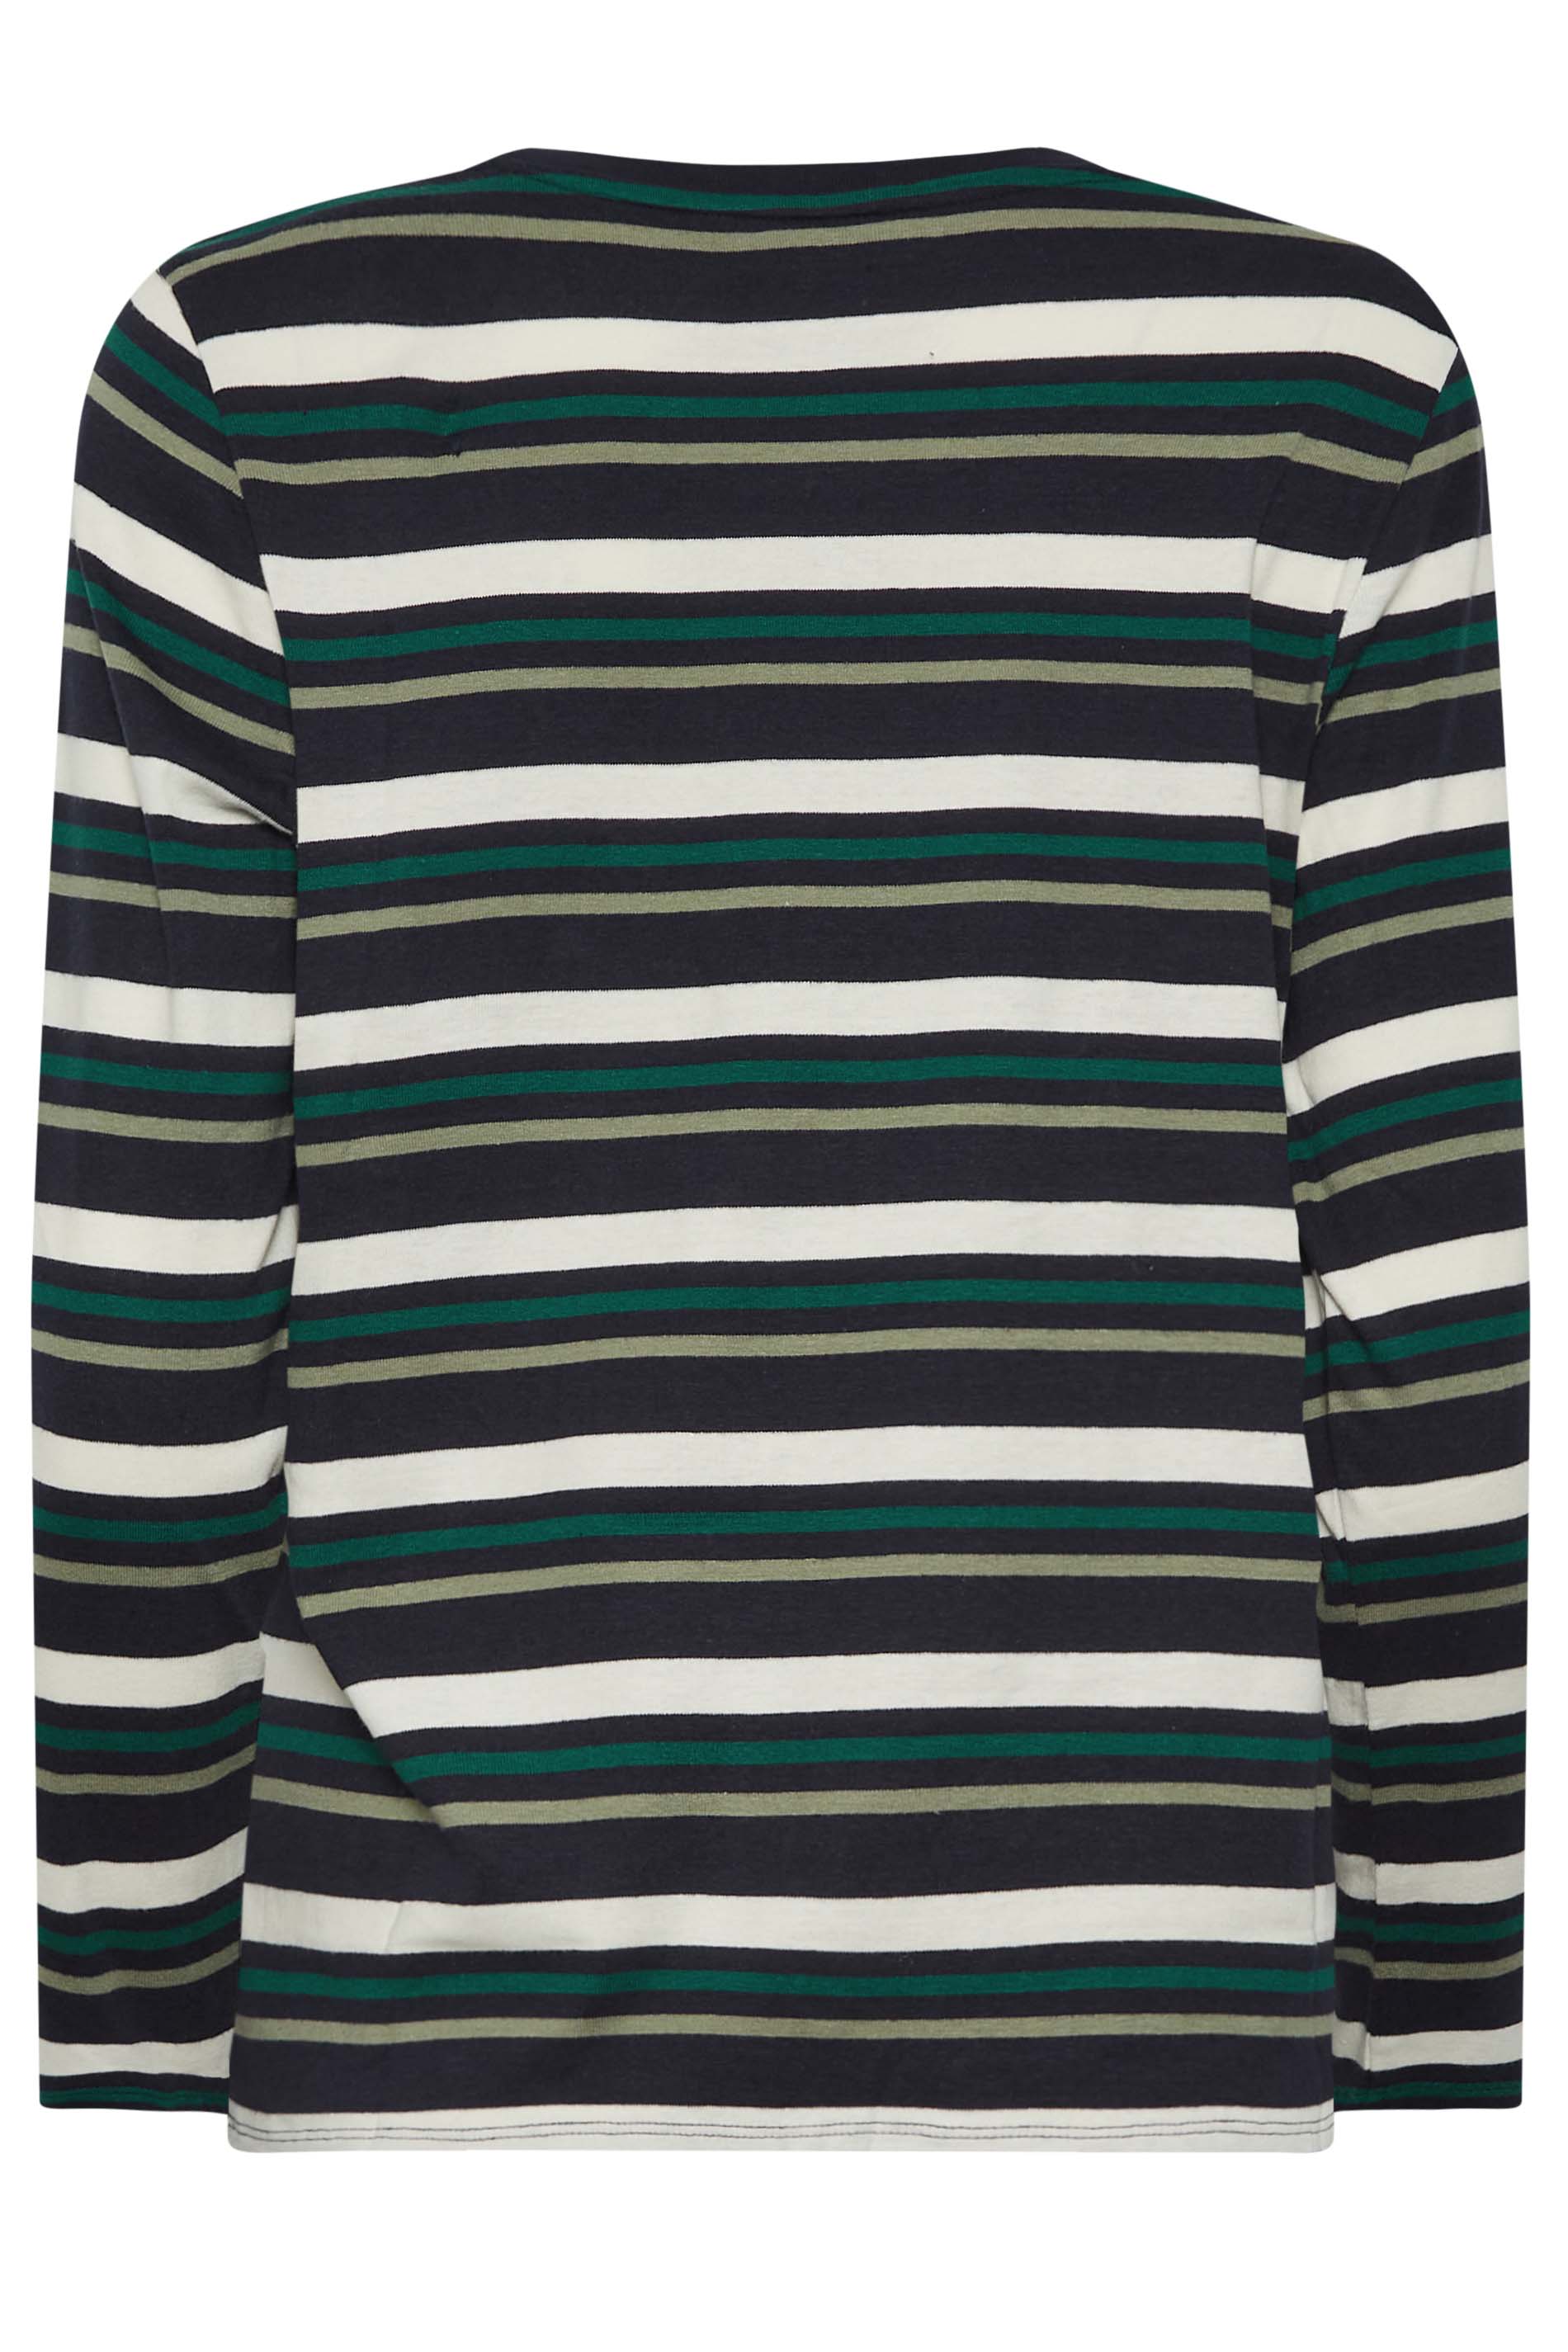 M&Co Green Teal Stripe Cotton Blend Long Sleeve Top | M&Co